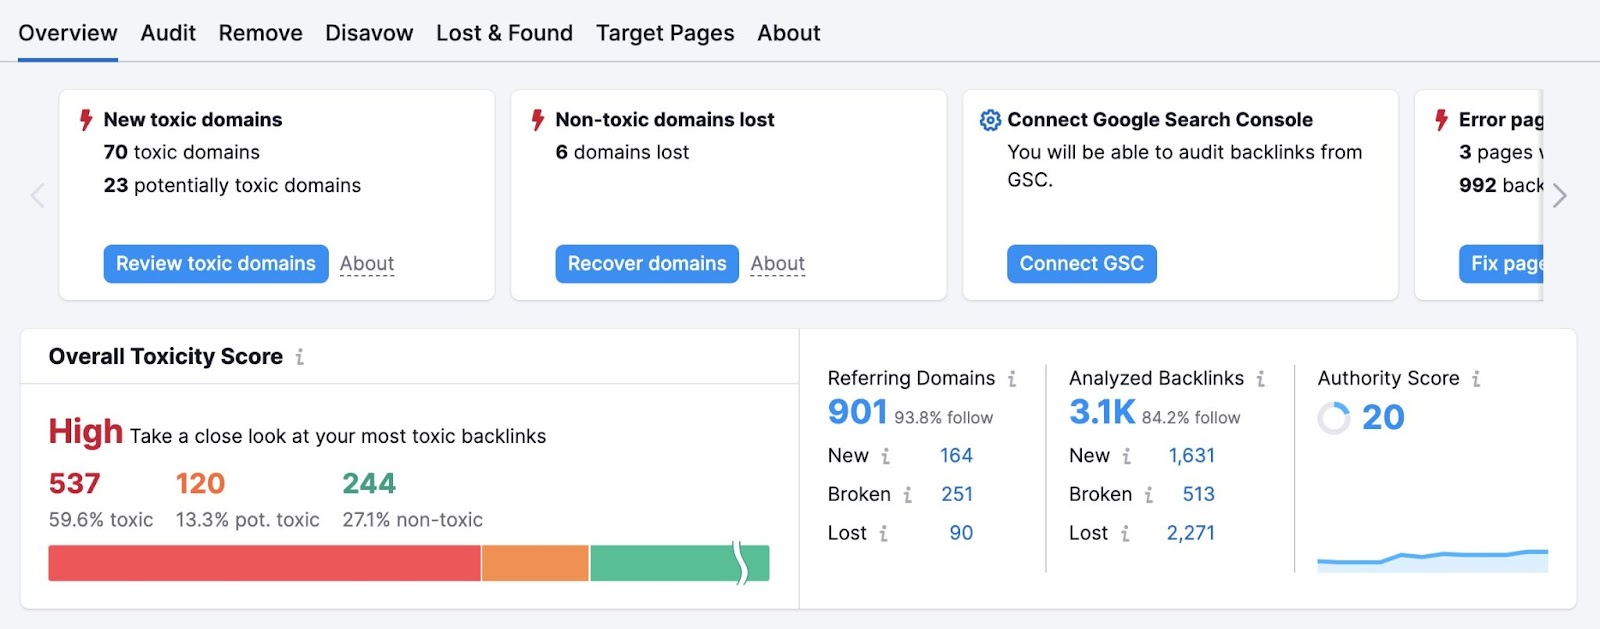 Backlink Audit overview showing overall toxicity score, referring domains, analyzed backlinks, and authority score.